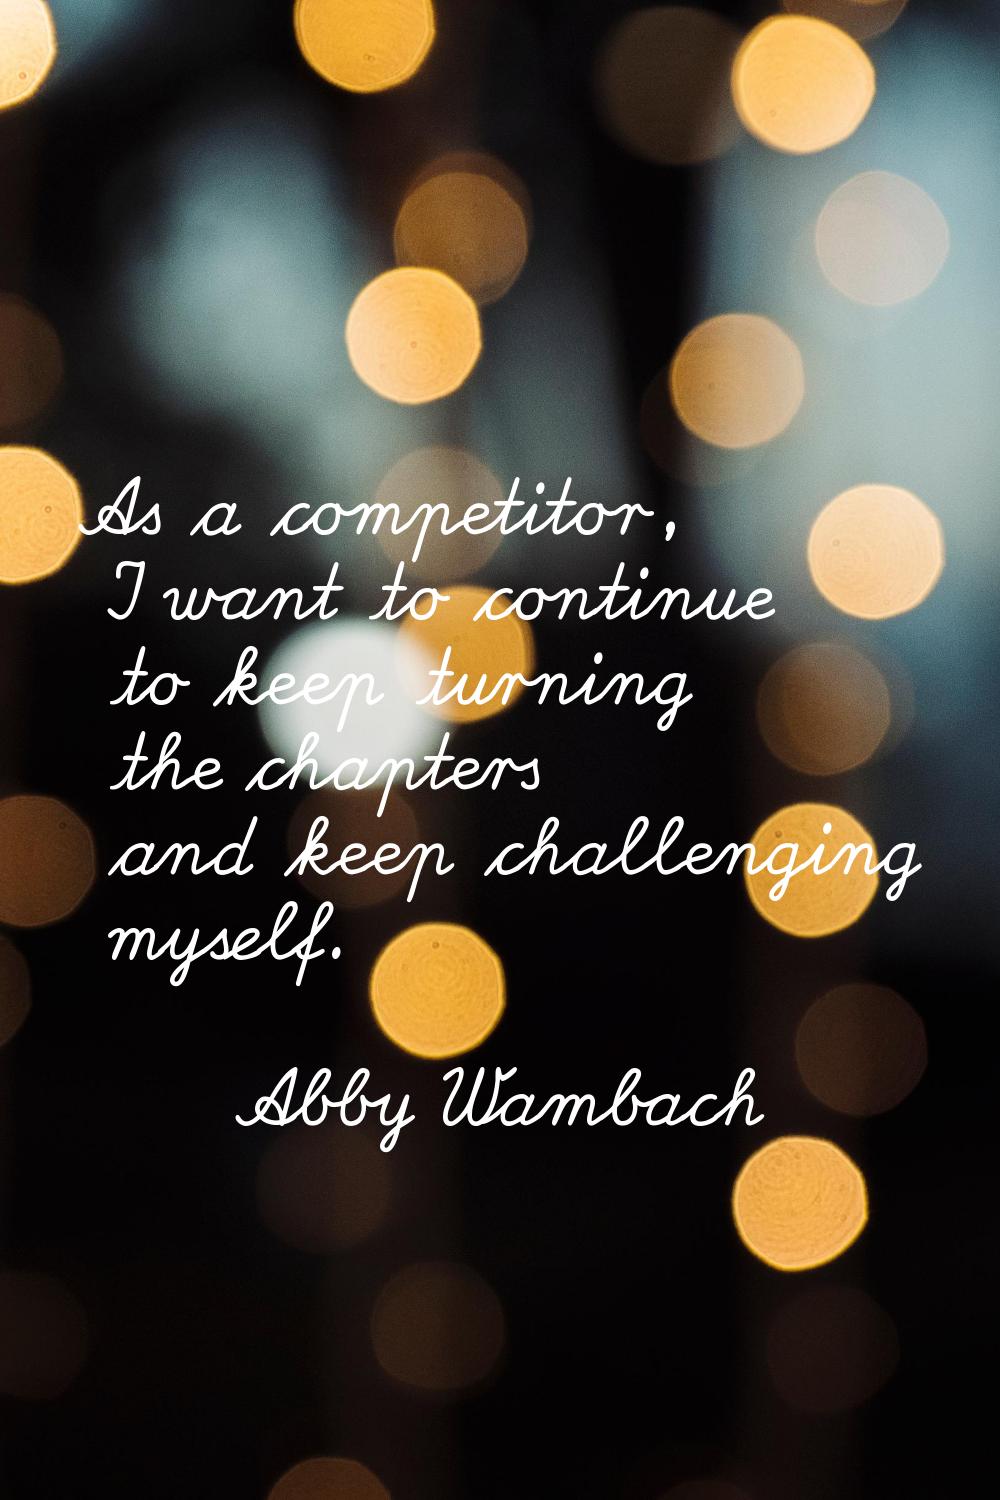 As a competitor, I want to continue to keep turning the chapters and keep challenging myself.